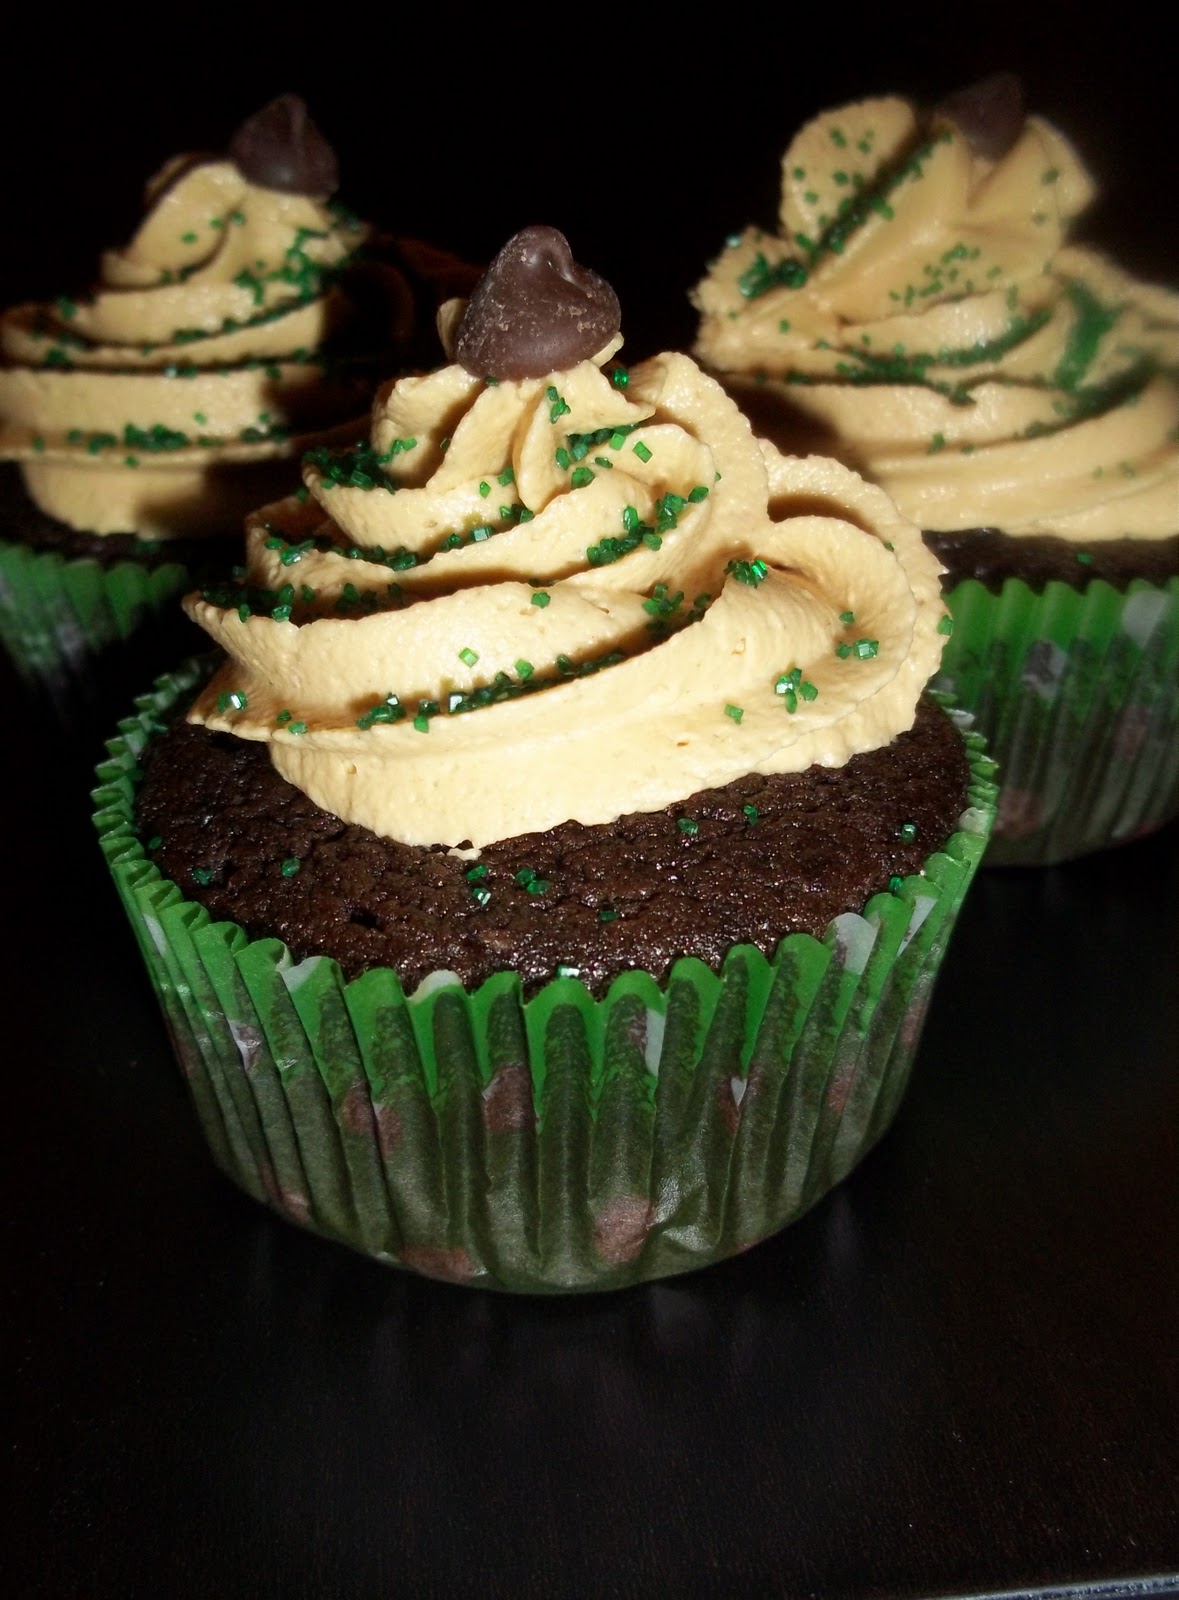 Sinful Sundays: First Place St. Patrick's Day Cupcakes!